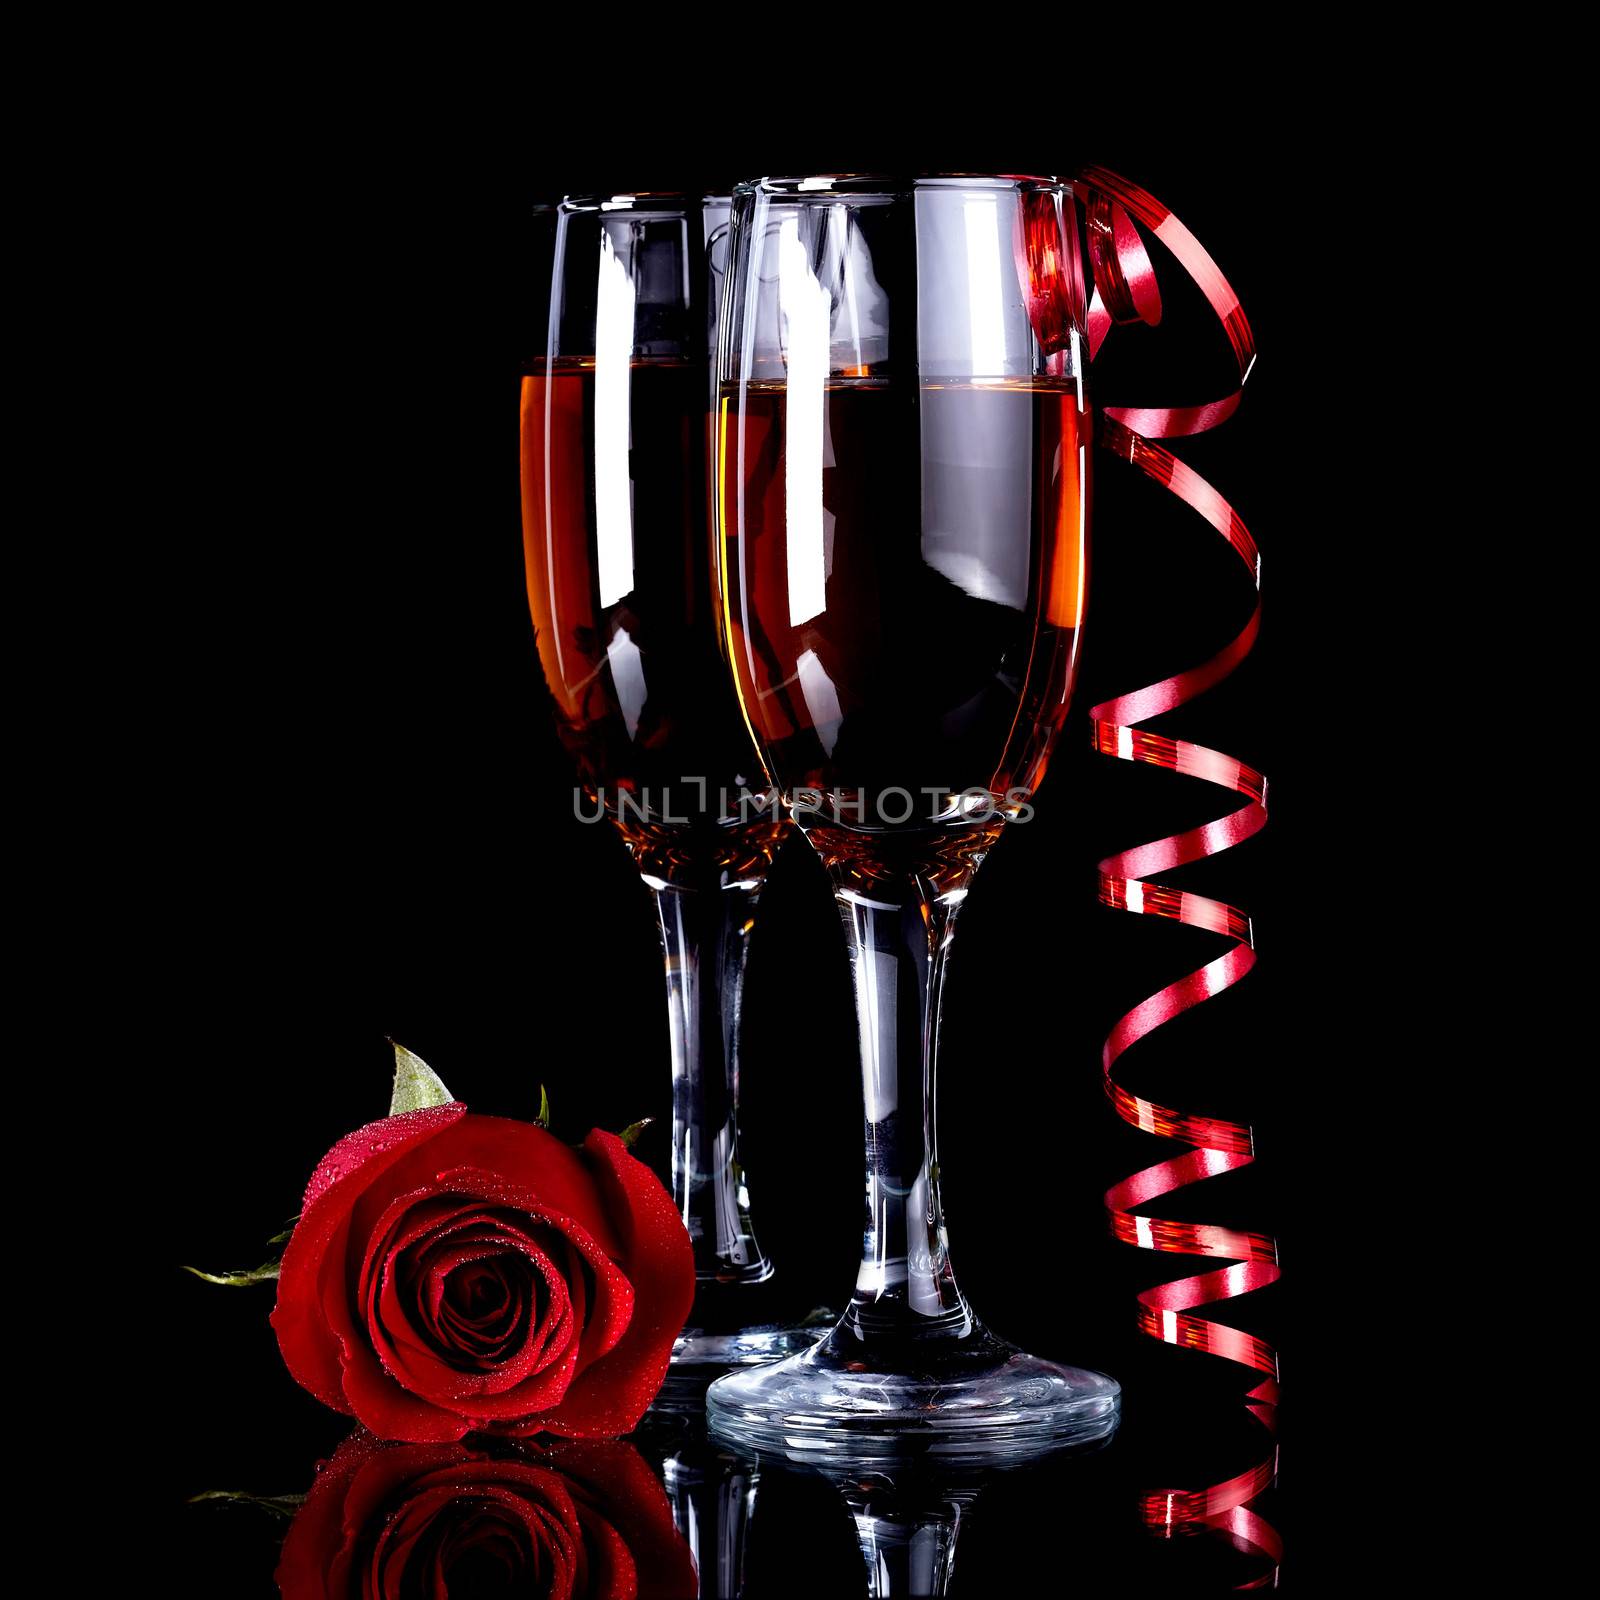 Rose with glasses and a red tape Alcohol and flower. Glasses with drink and a red rose.